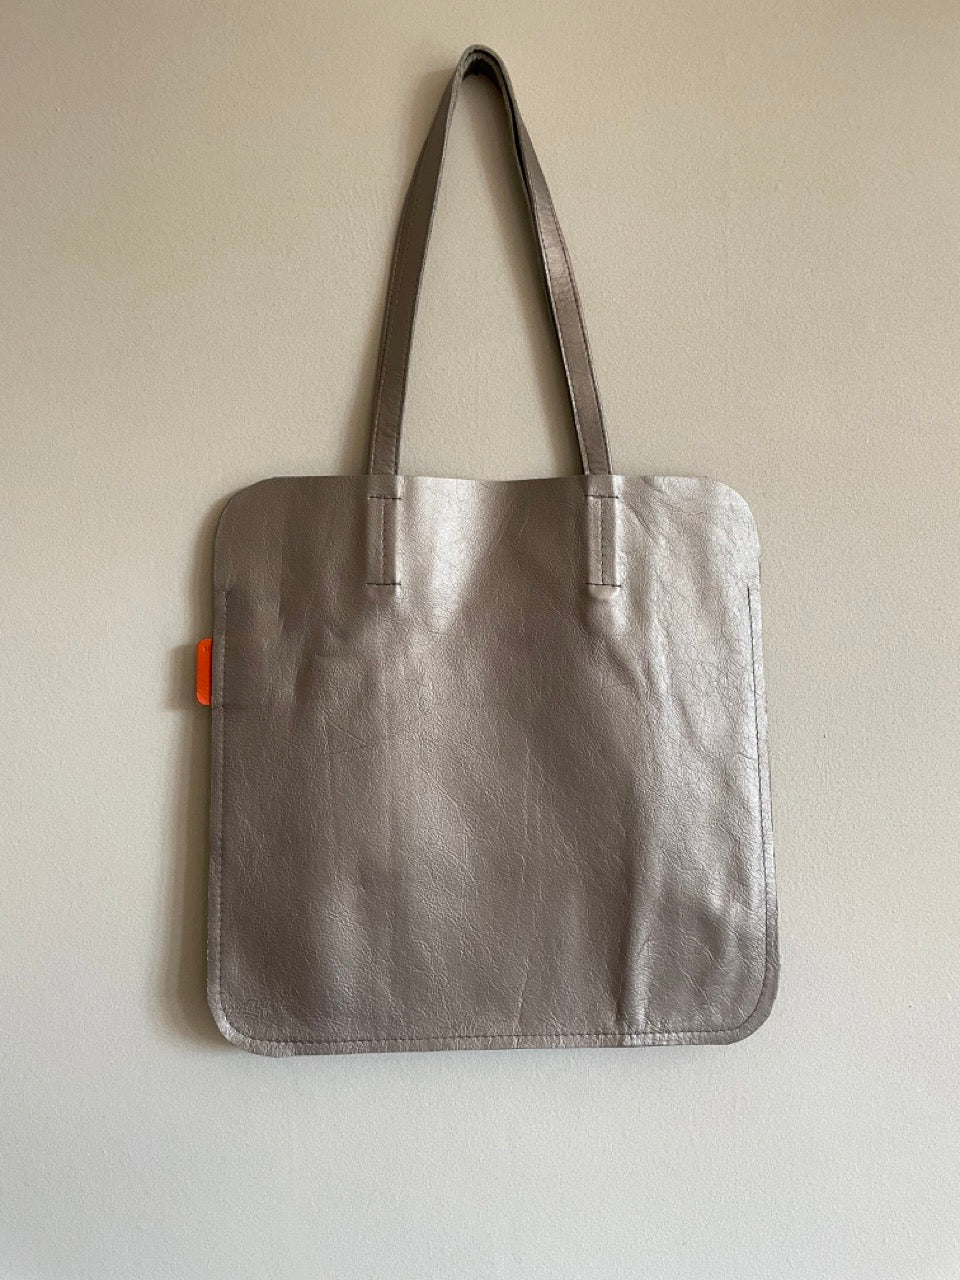 Marmalade Leather Tote Bag - Colour: Oyster